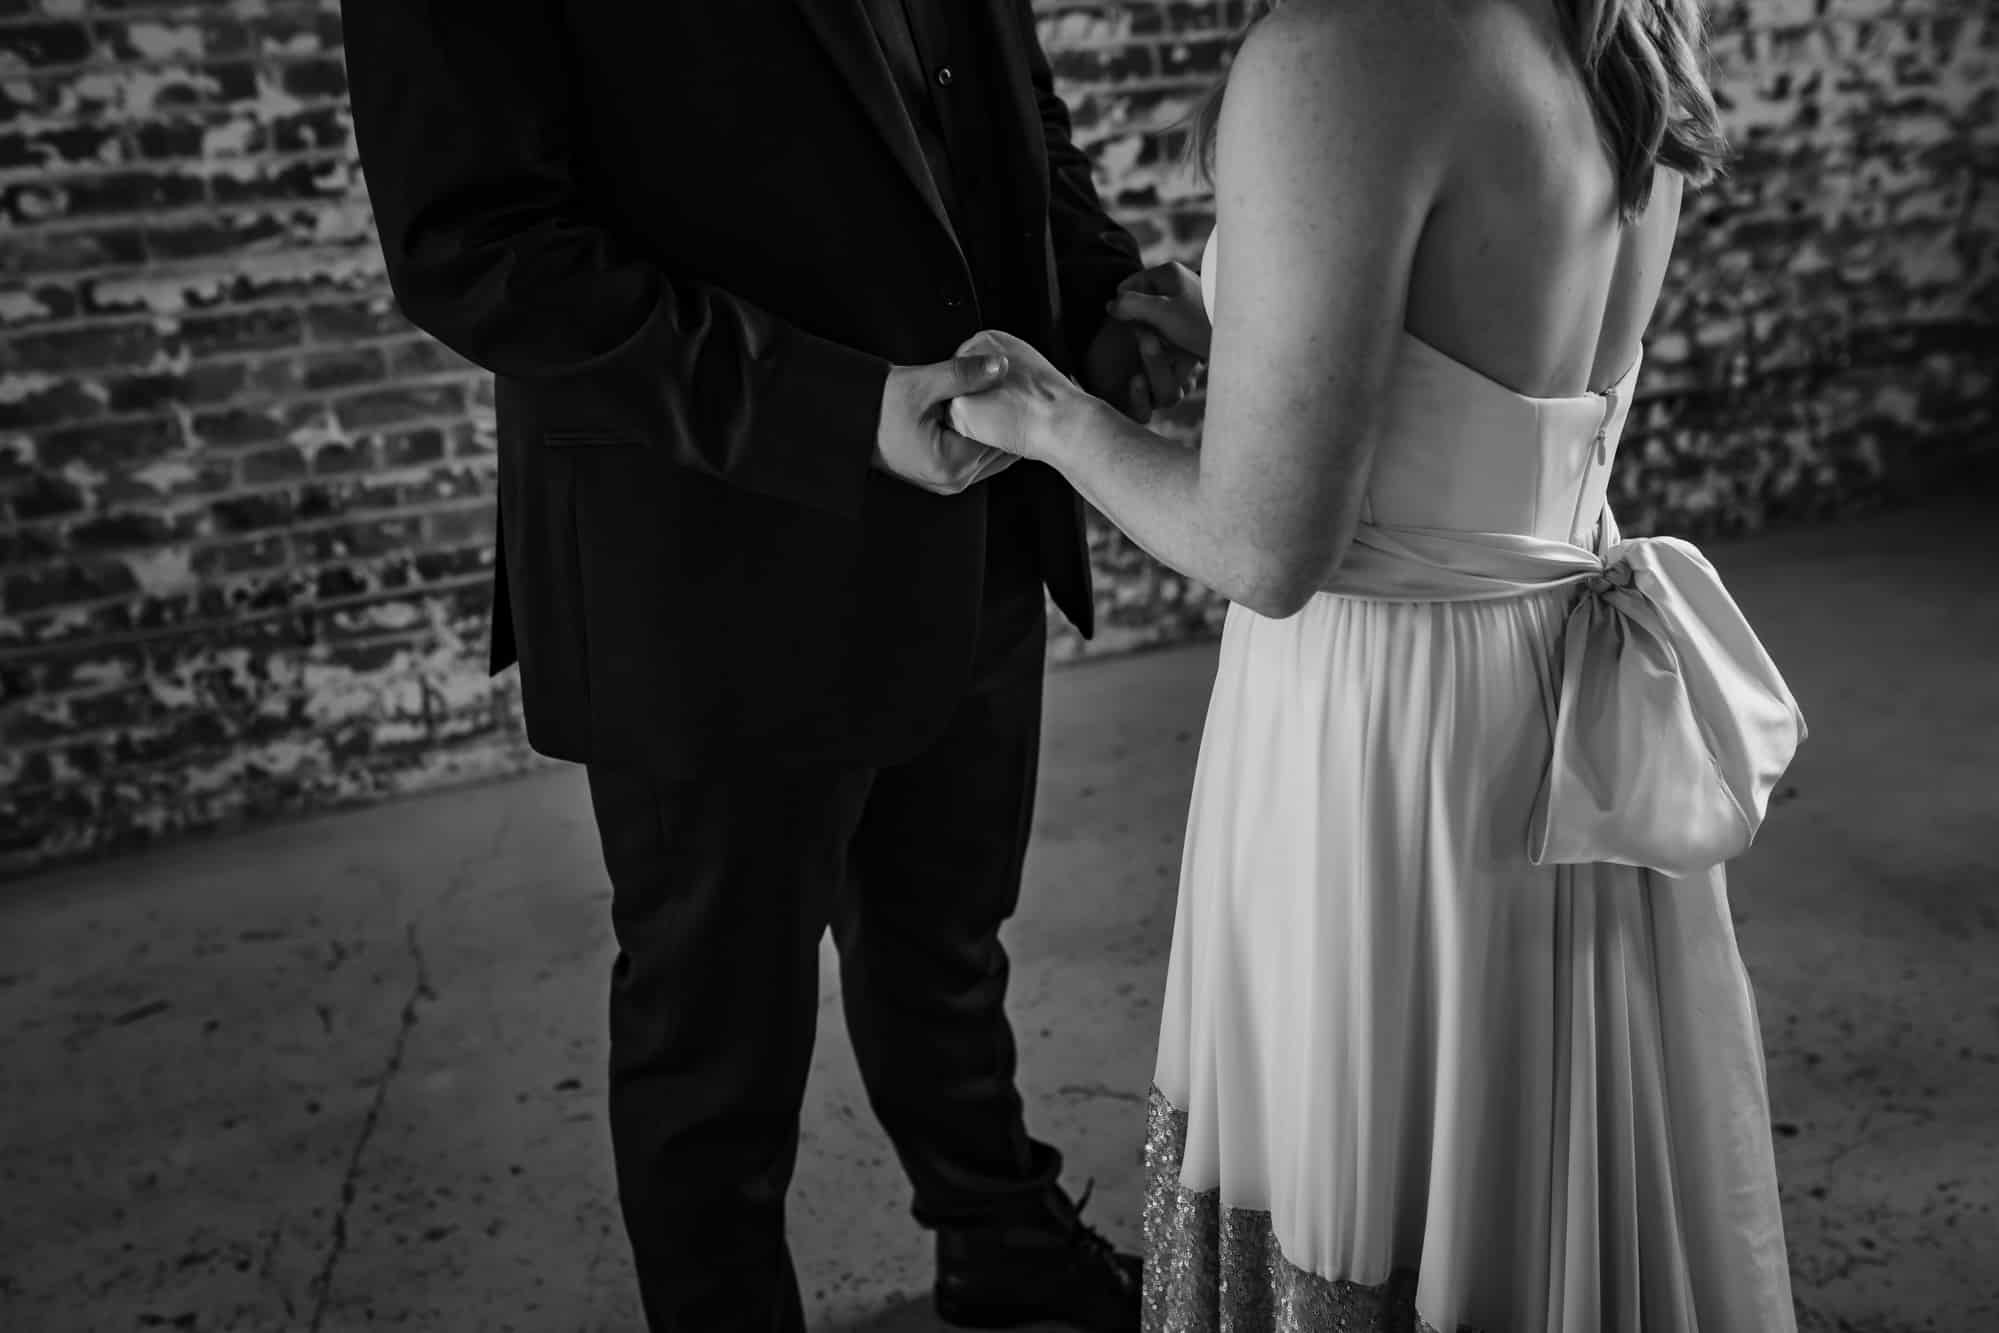 black and white wedding, bride and groom holding hands, wedding dress tie in the back, holding hands